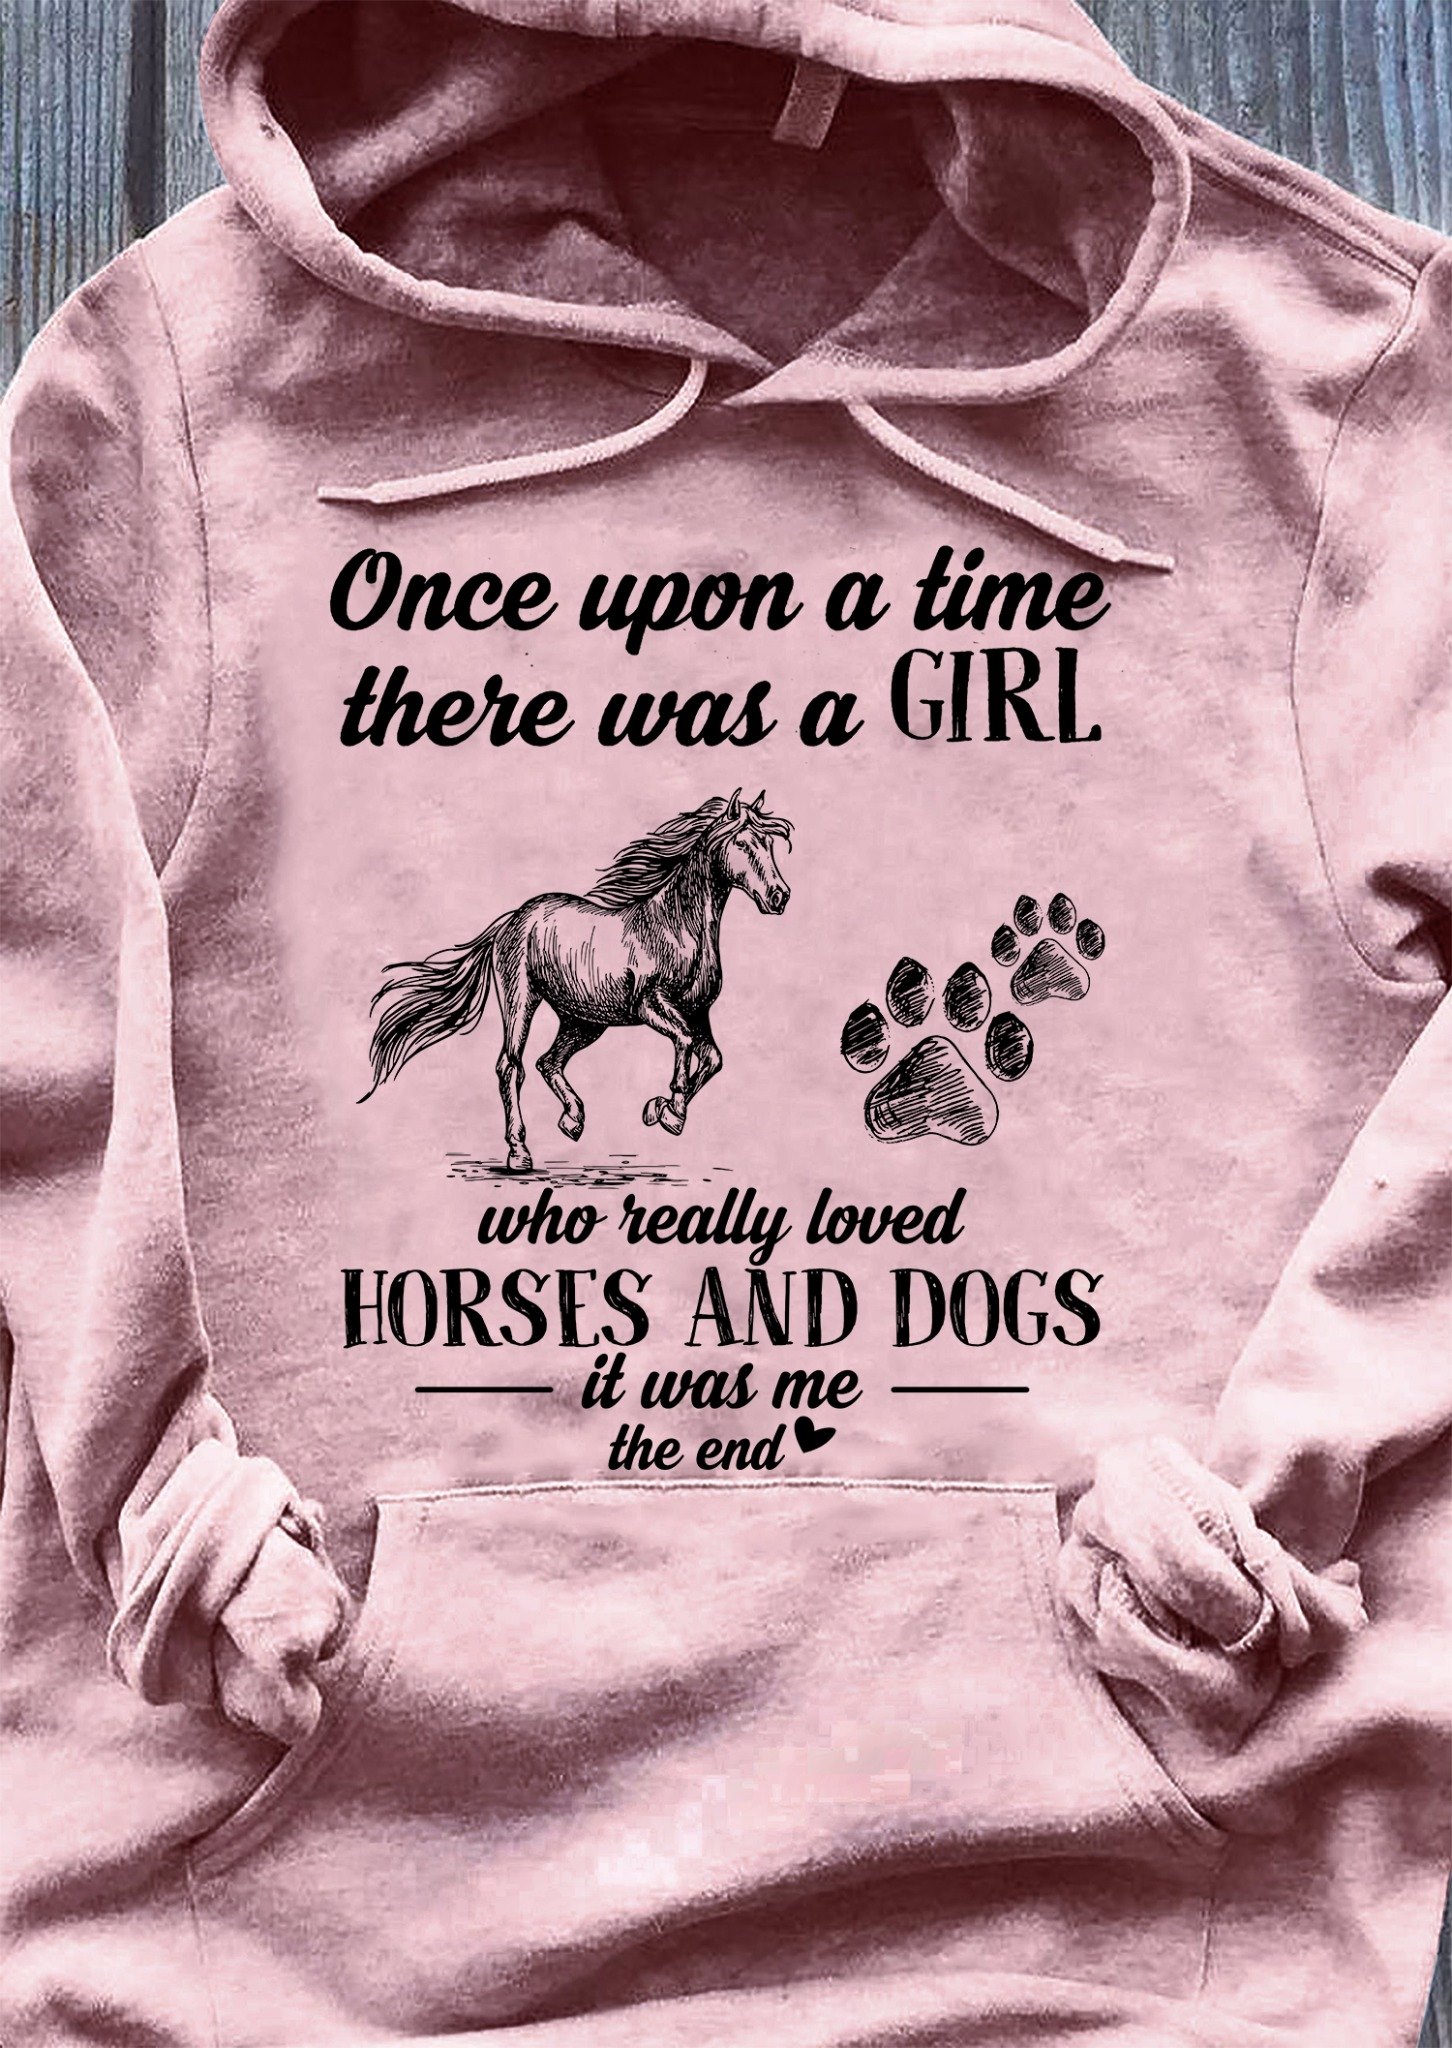 once upon a time there was a girl  who really loved horses and dog. it was me  the end